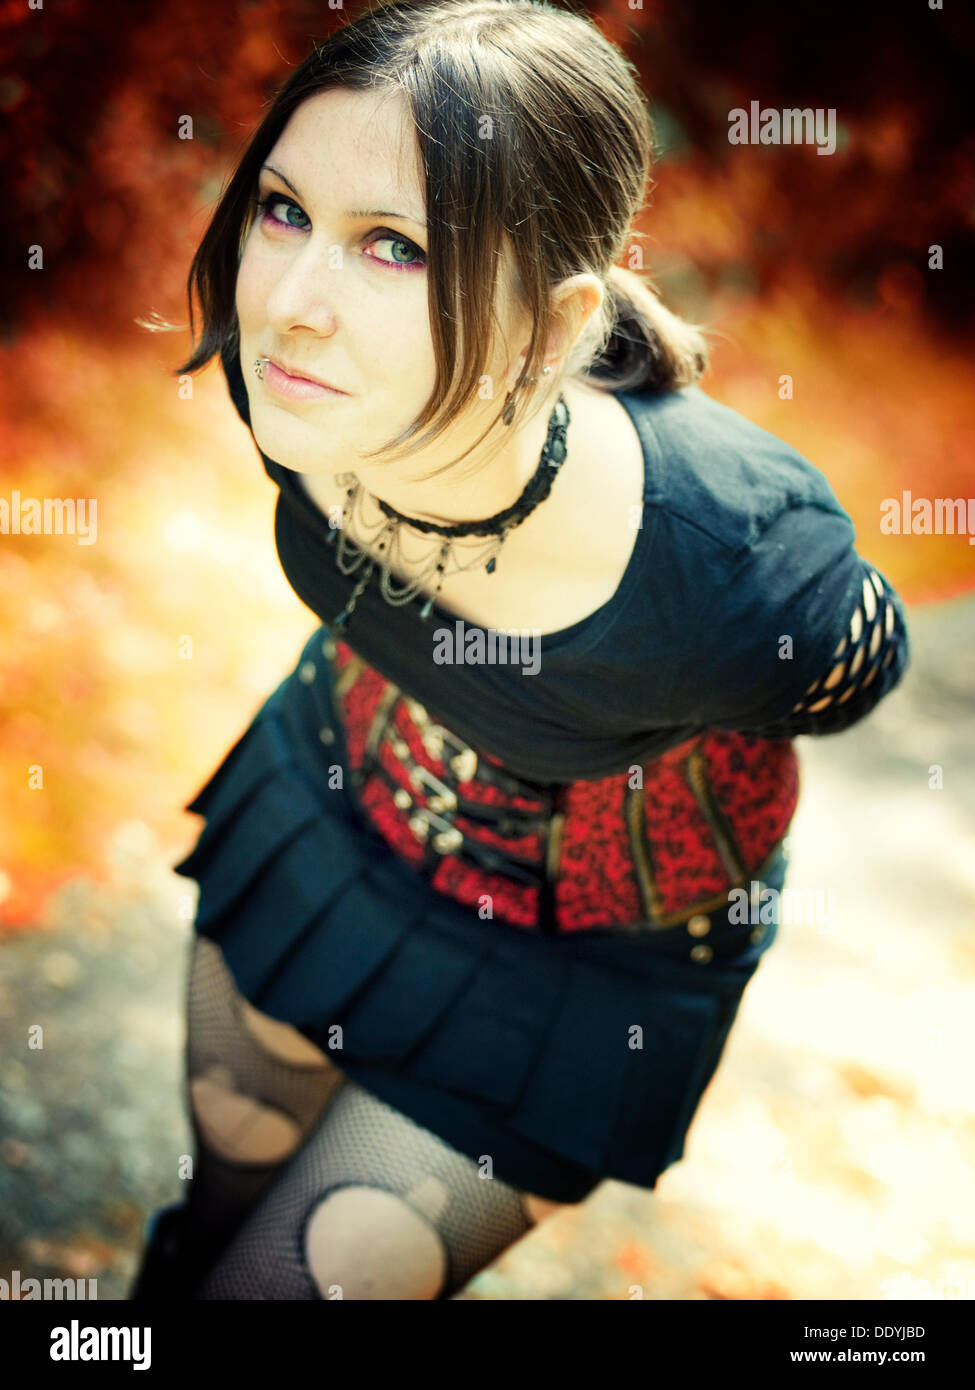 Woman, Gothic, leaning forward, outdoors, autumn Stock Photo